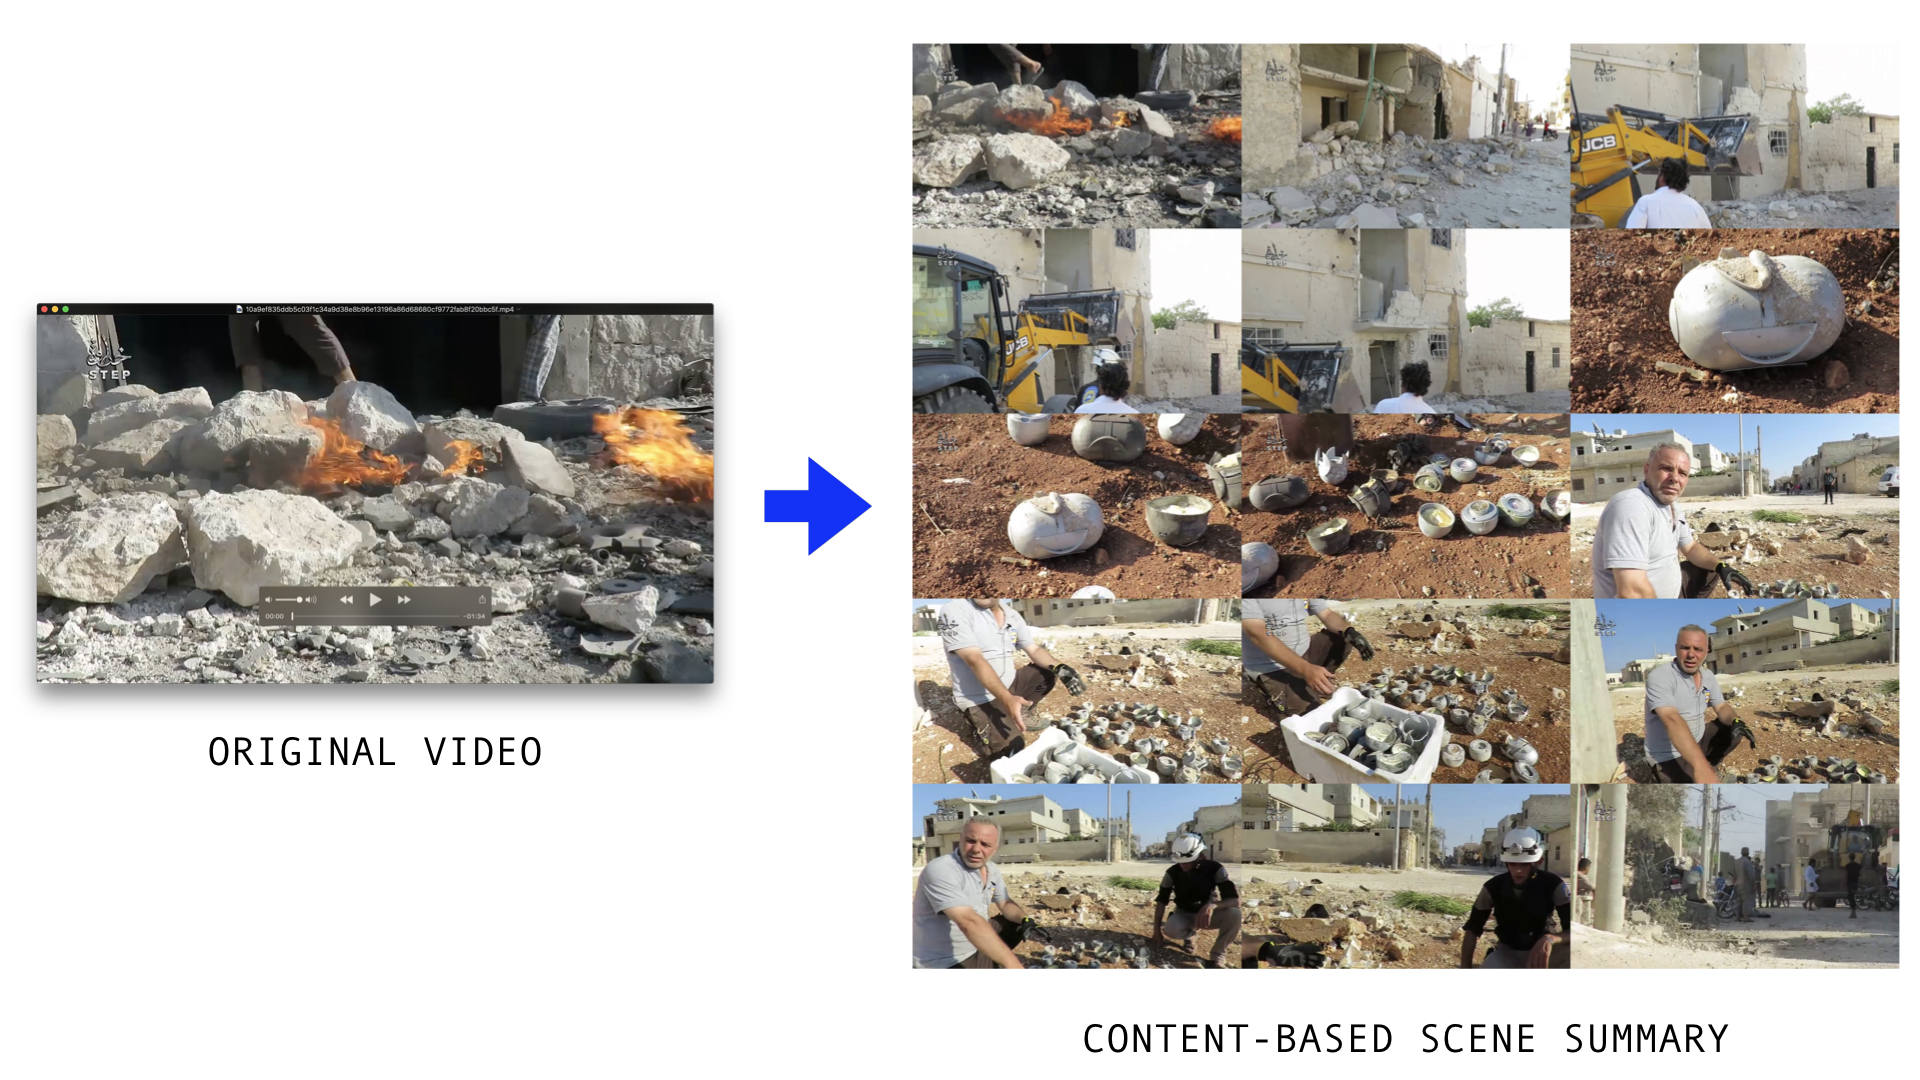 Example video containing cluster munition via Mnemonic.org